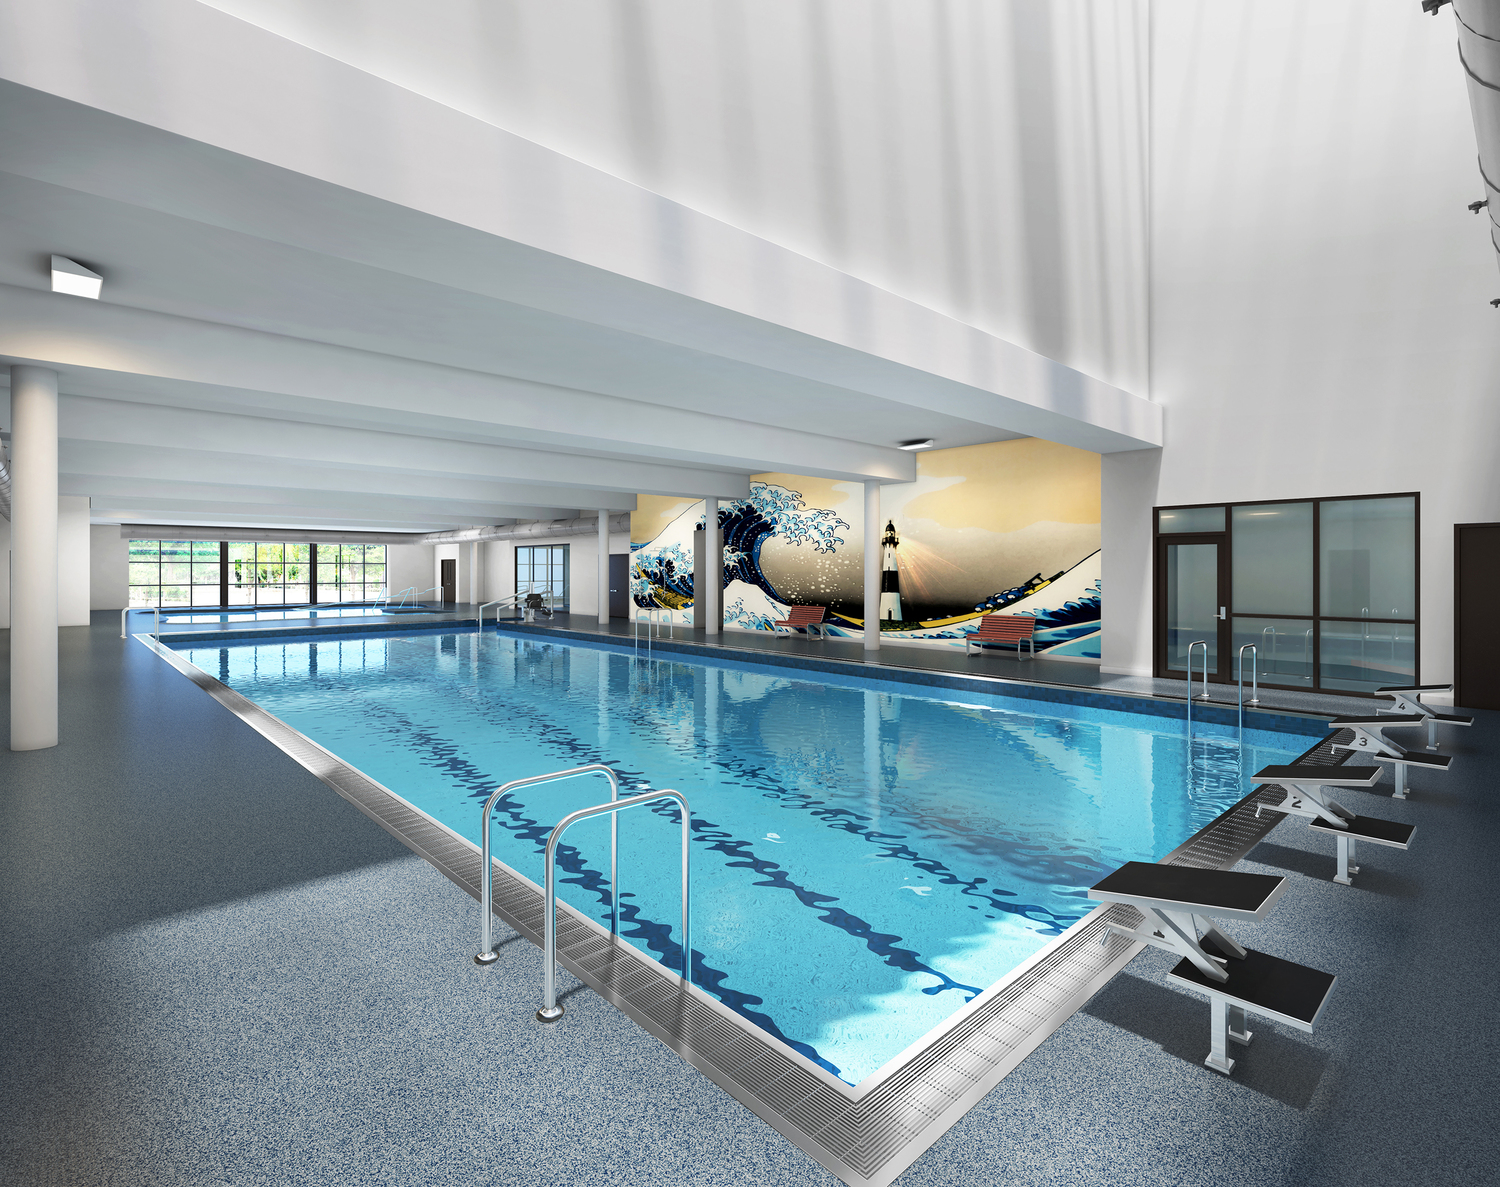 New renderings show what the Montauk Playhouse Aquatic Center, which will have both a lap pool and a therapeutic pool, will look like.